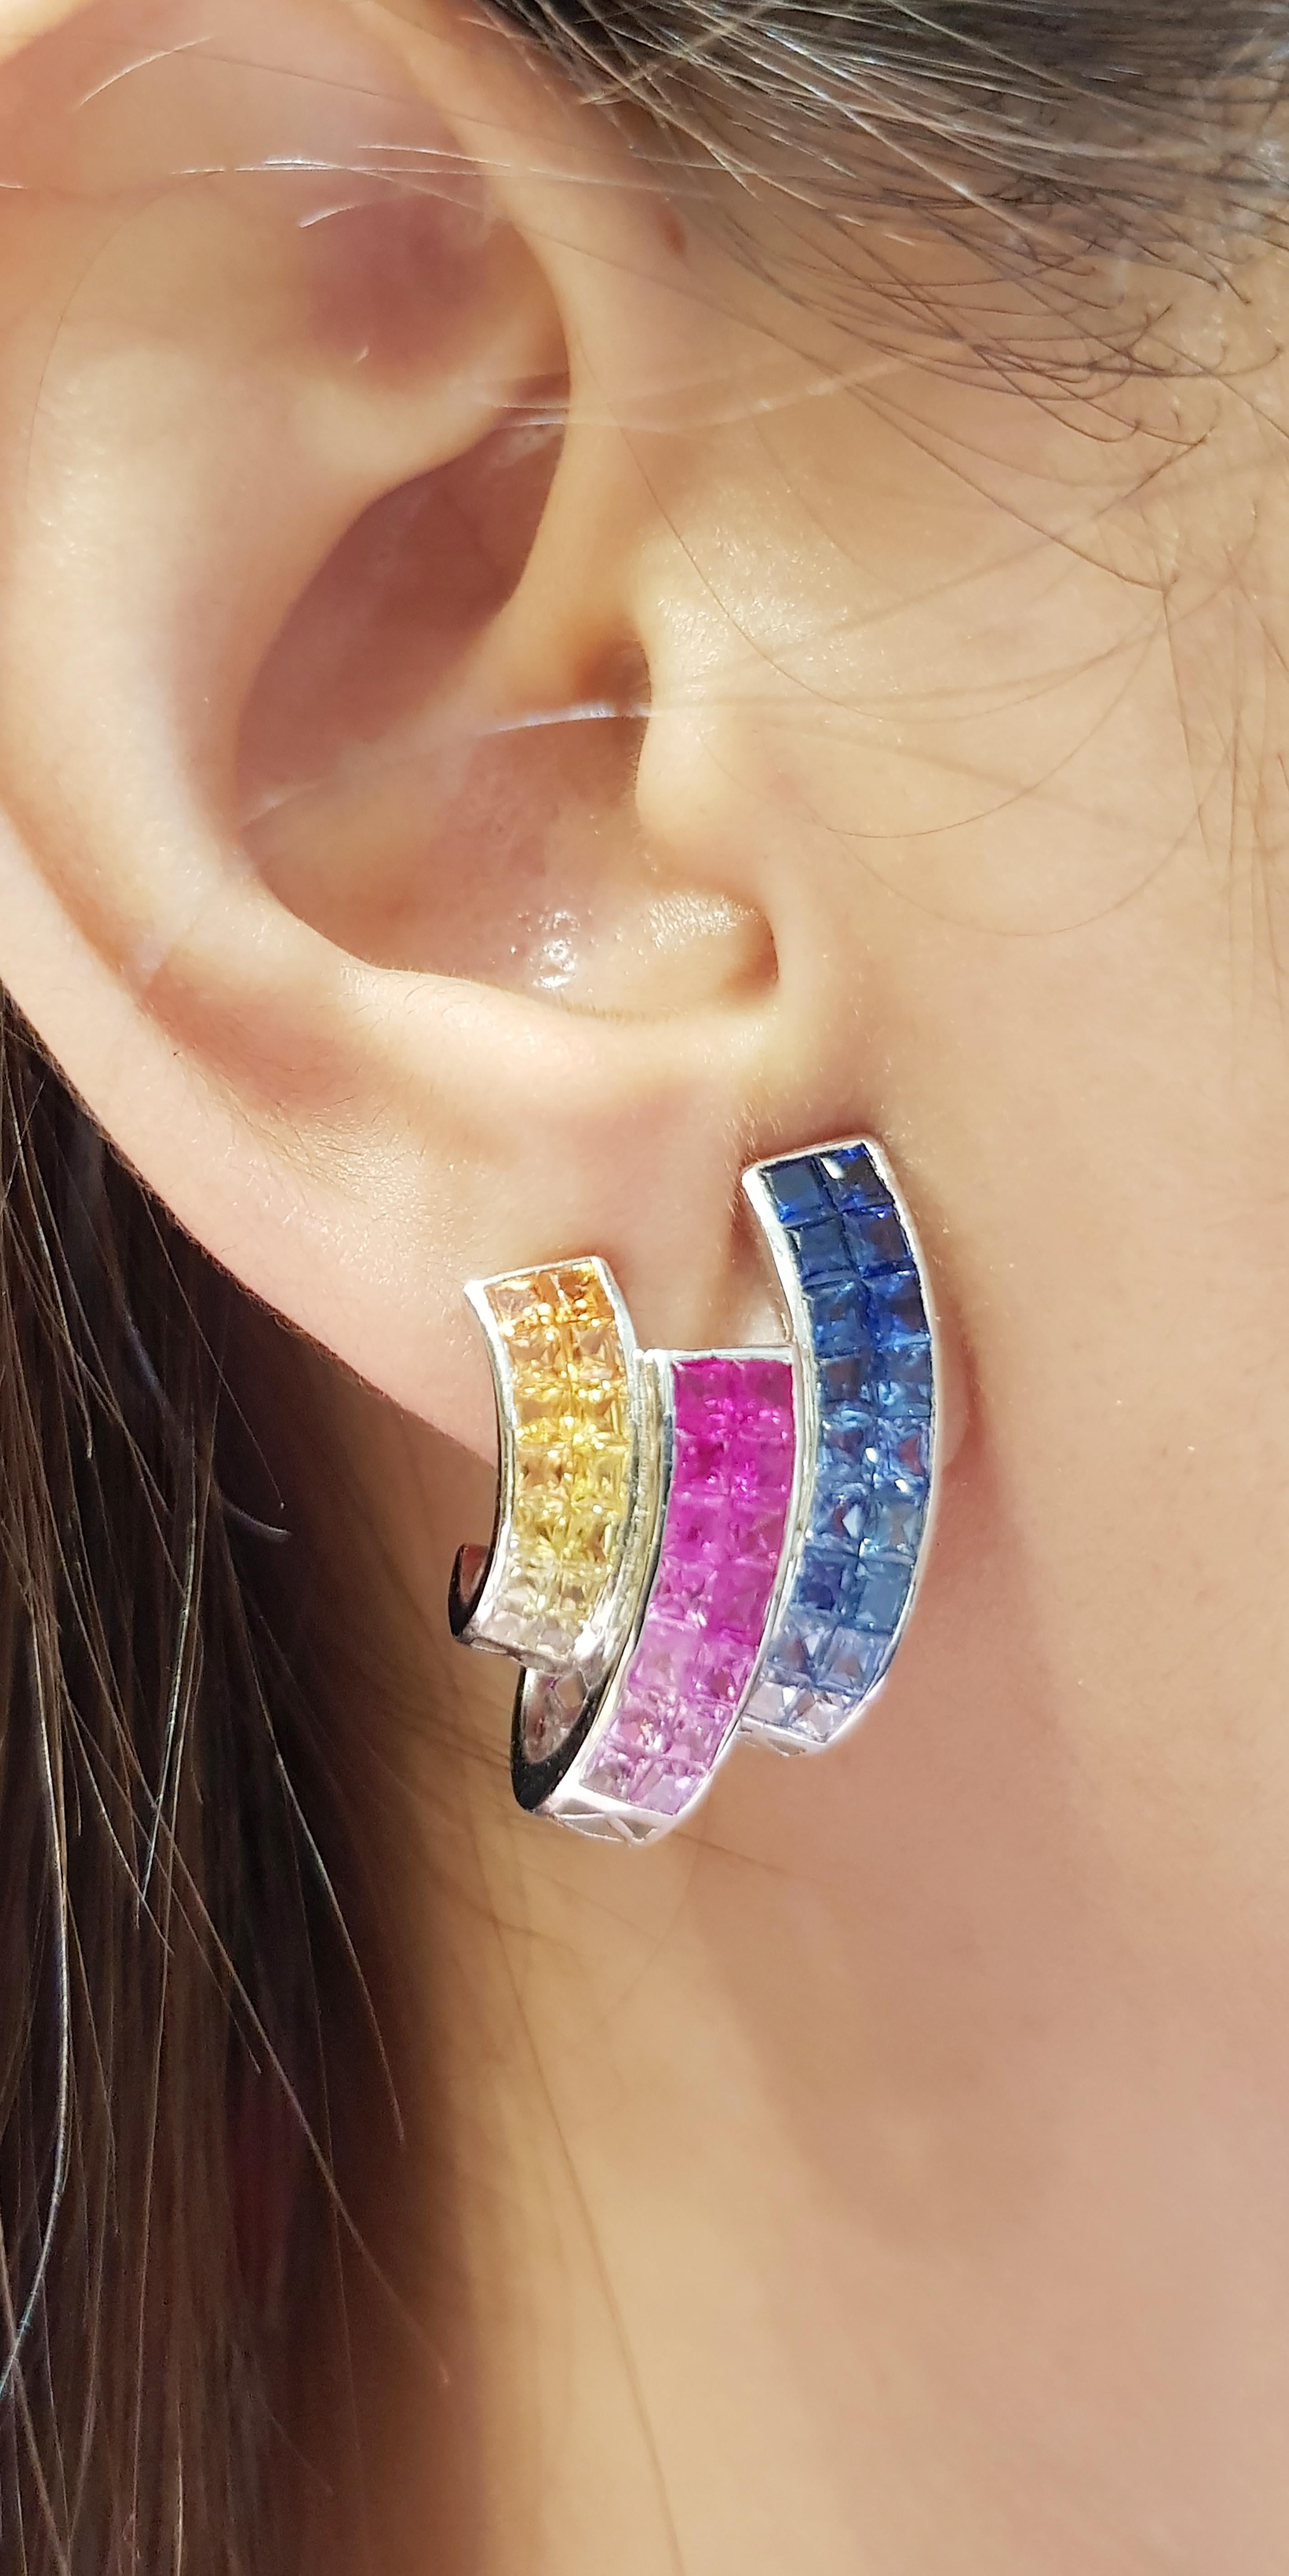 Rainbow Colour Sapphire 10.06 carats Earrings set in 18 Karat White Gold Settings

Width:  1.6 cm 
Length: 2.5 cm
Total Weight: 14.51 grams

